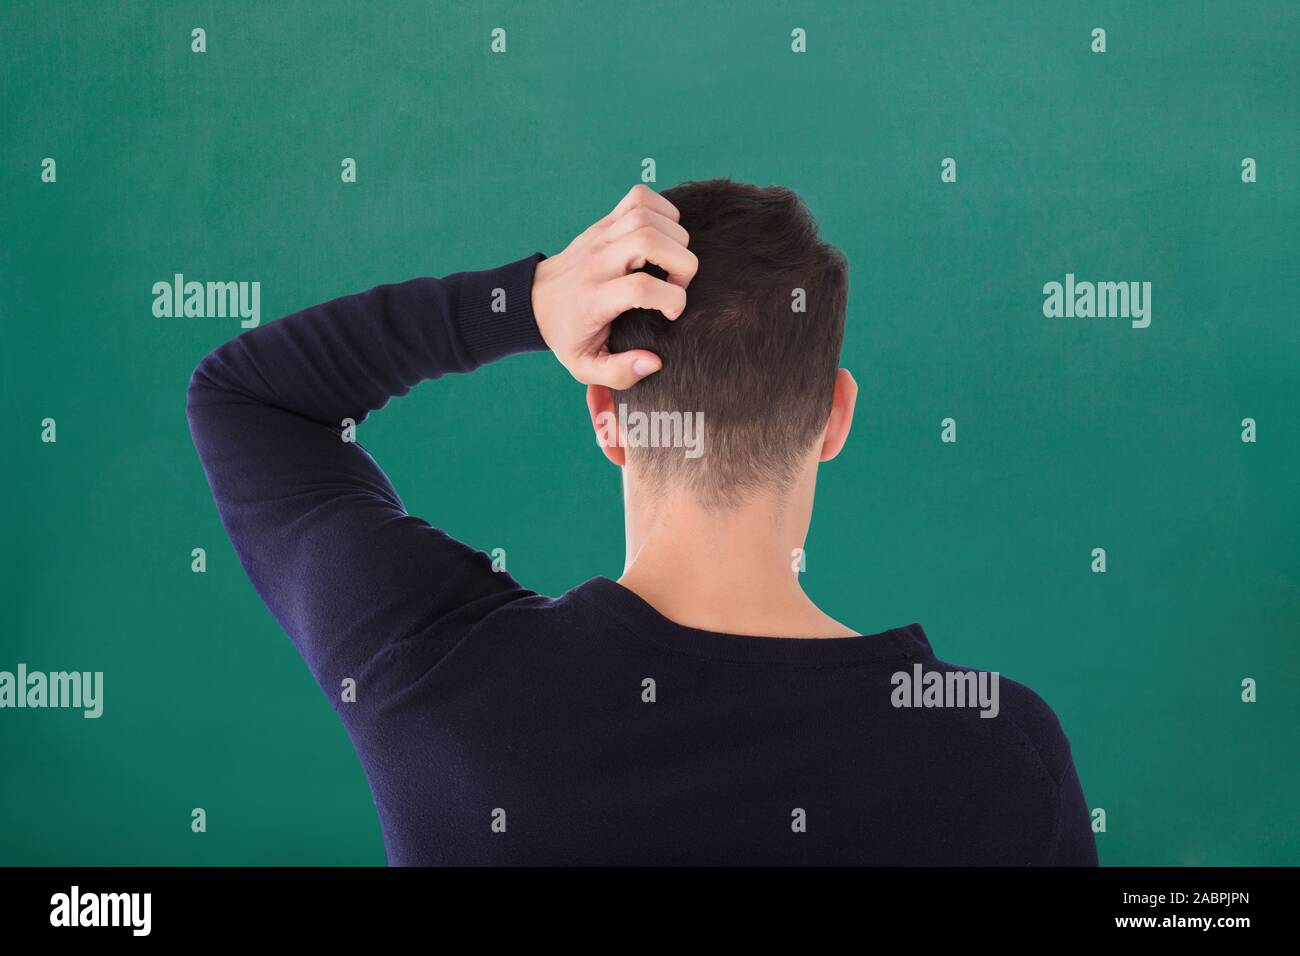 Rear View Of Young Man In Blue T-shirt Scratching His Head Against Green Background Stock Photo